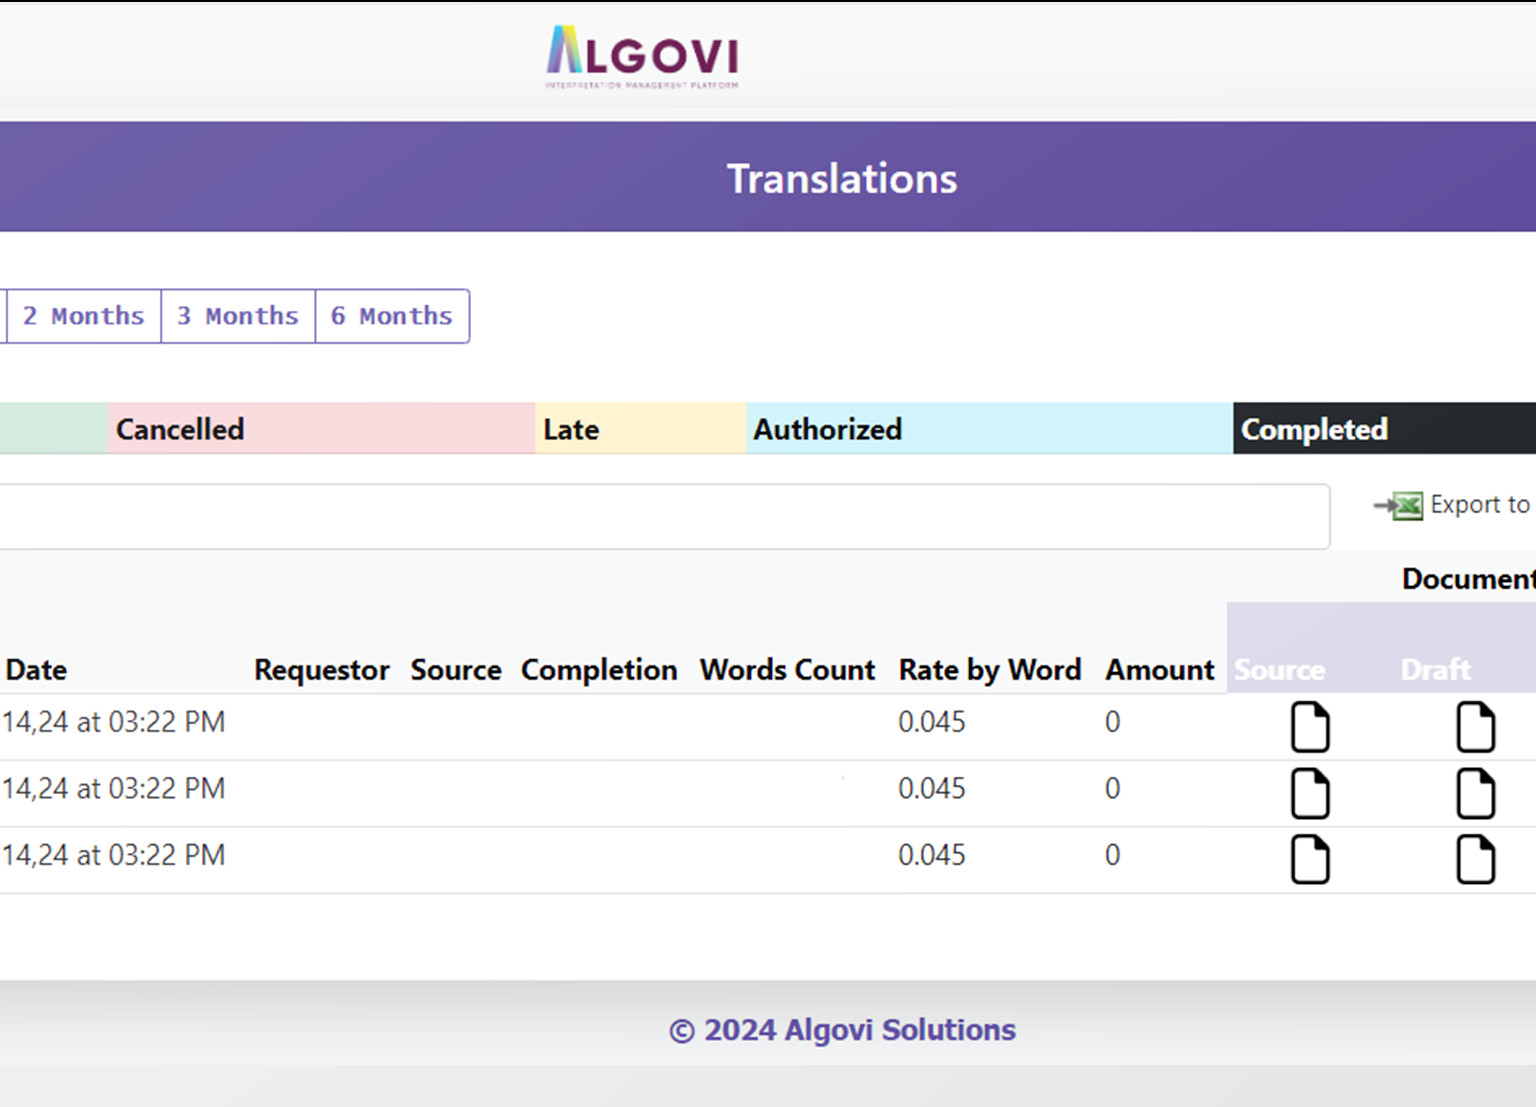 Screenshot of the algovi translation management system interface showing different project statuses like cancelled, late, authorized, and completed with details of translation requests including dates, word counts, and rates.